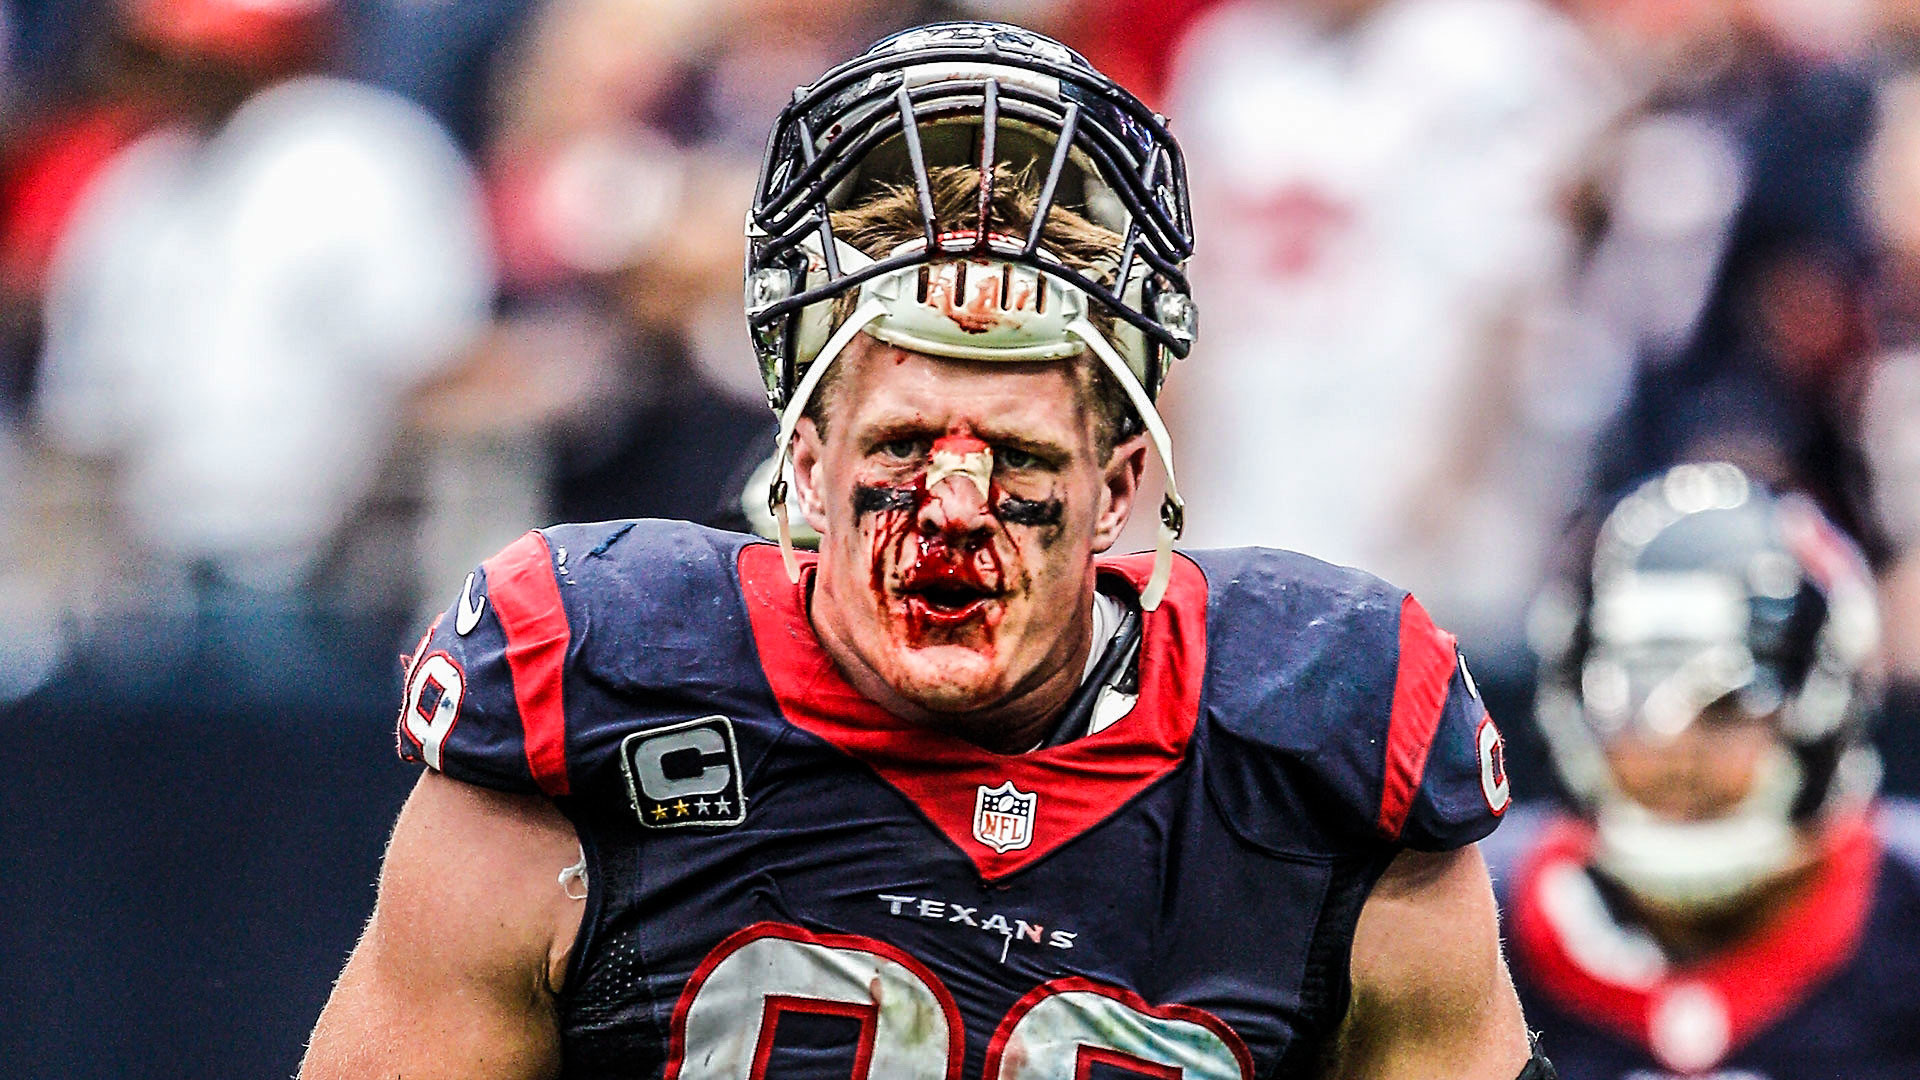 1920x1080 J.J. Watt's tough pose disrespects concussion crisis and those fighting it  | NFL | Sporting News